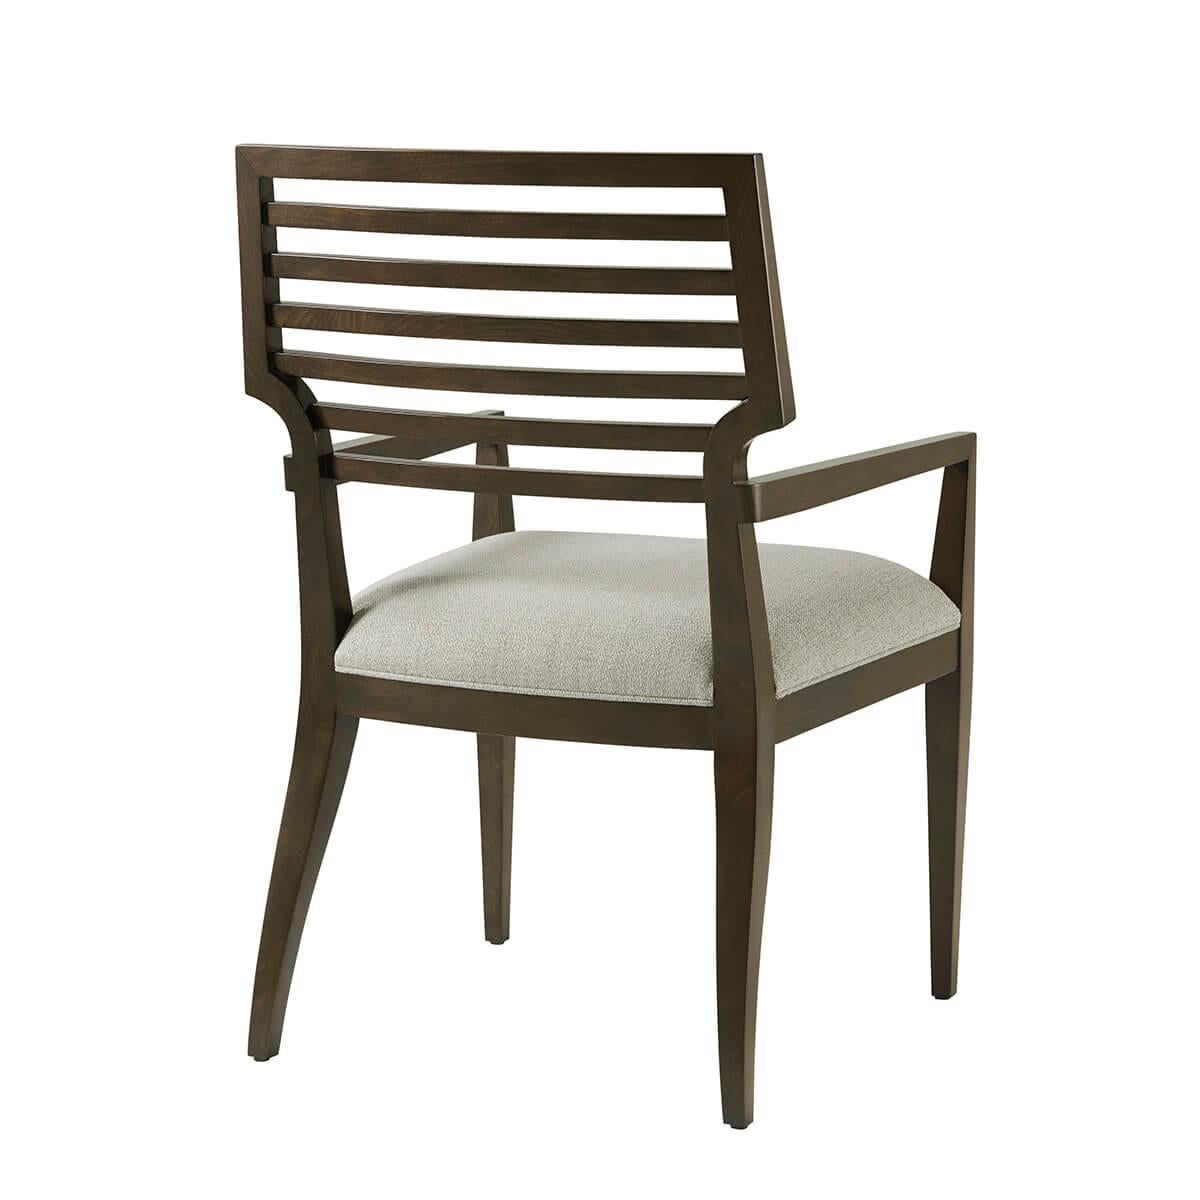 Crafted from Prima Vera in our Bistre finish, featuring a sophisticated horizontally slatted back, a padded cushion upholstered with neutral performance fabric, all raised on square tapered legs.

Dimensions: 23